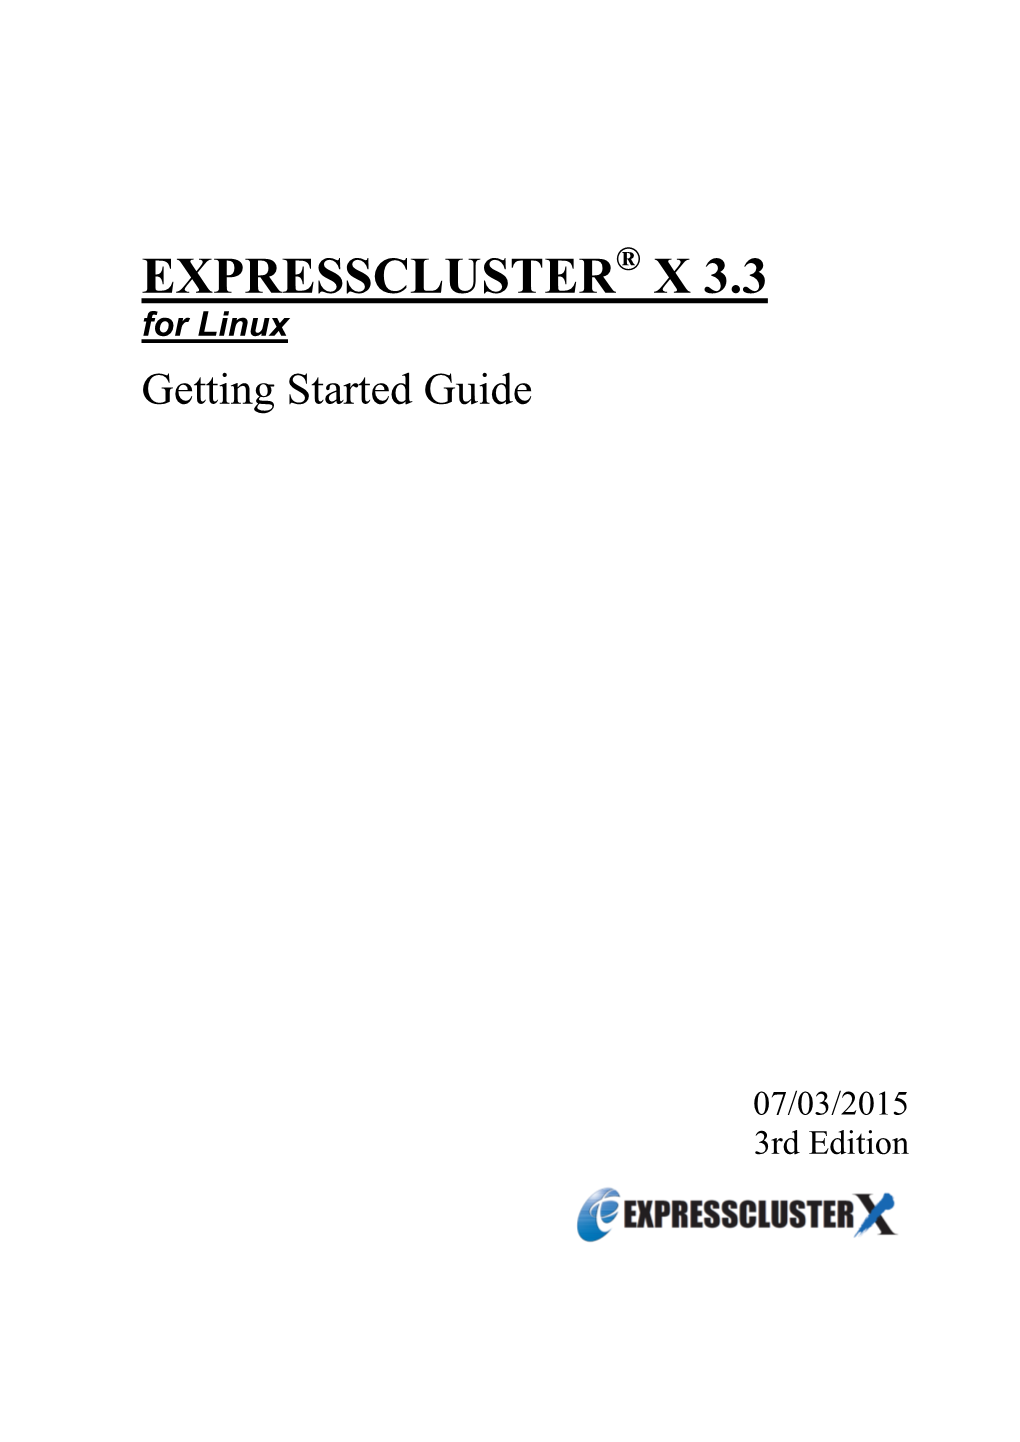 EXPRESSCLUSTER X 3.3 for Linux Getting Started Guide 16 High Availability (HA) Cluster